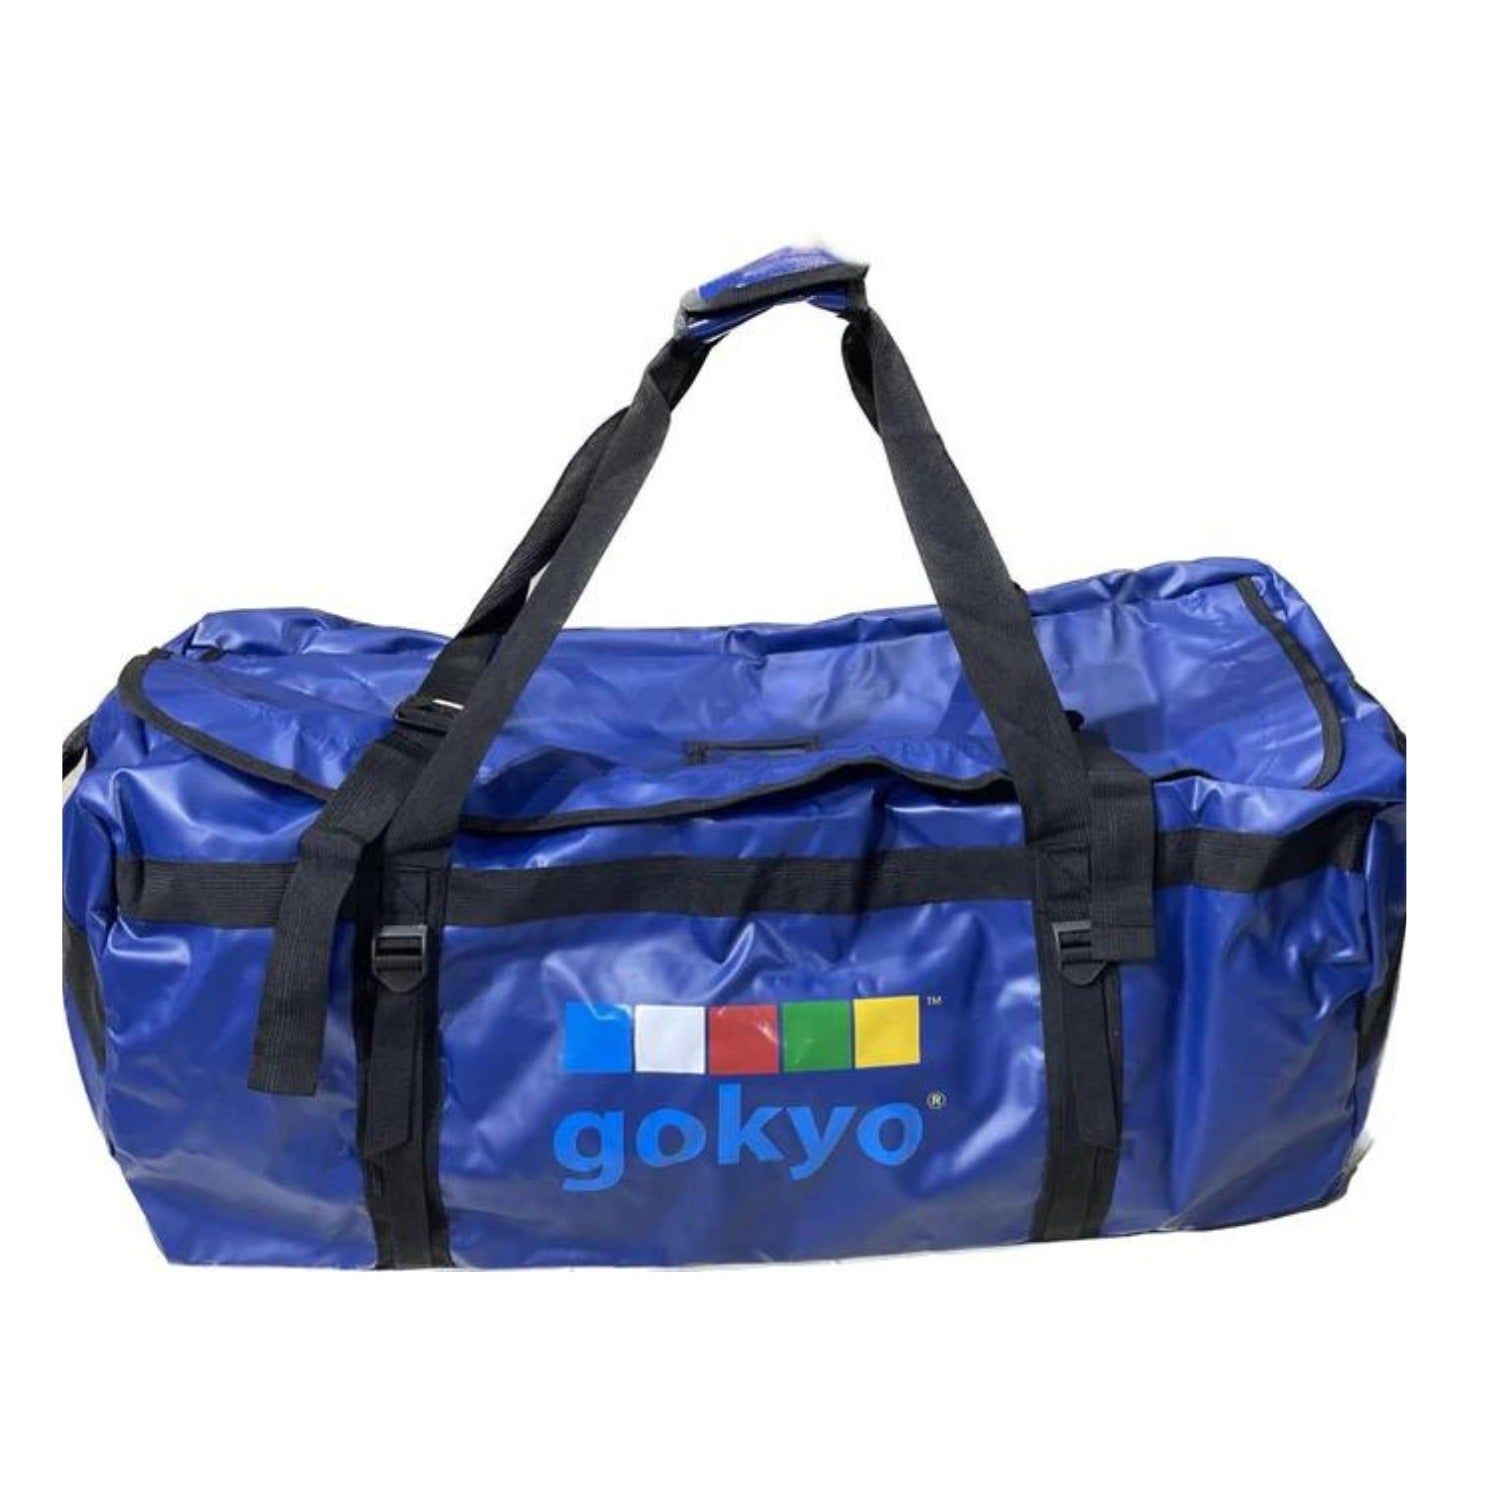 Buy Gokyo K2 Duffle Bag for Treks & Expeditions Blue | Trekking & Expedition Duffle Bag at Gokyo Outdoor Clothing & Gear